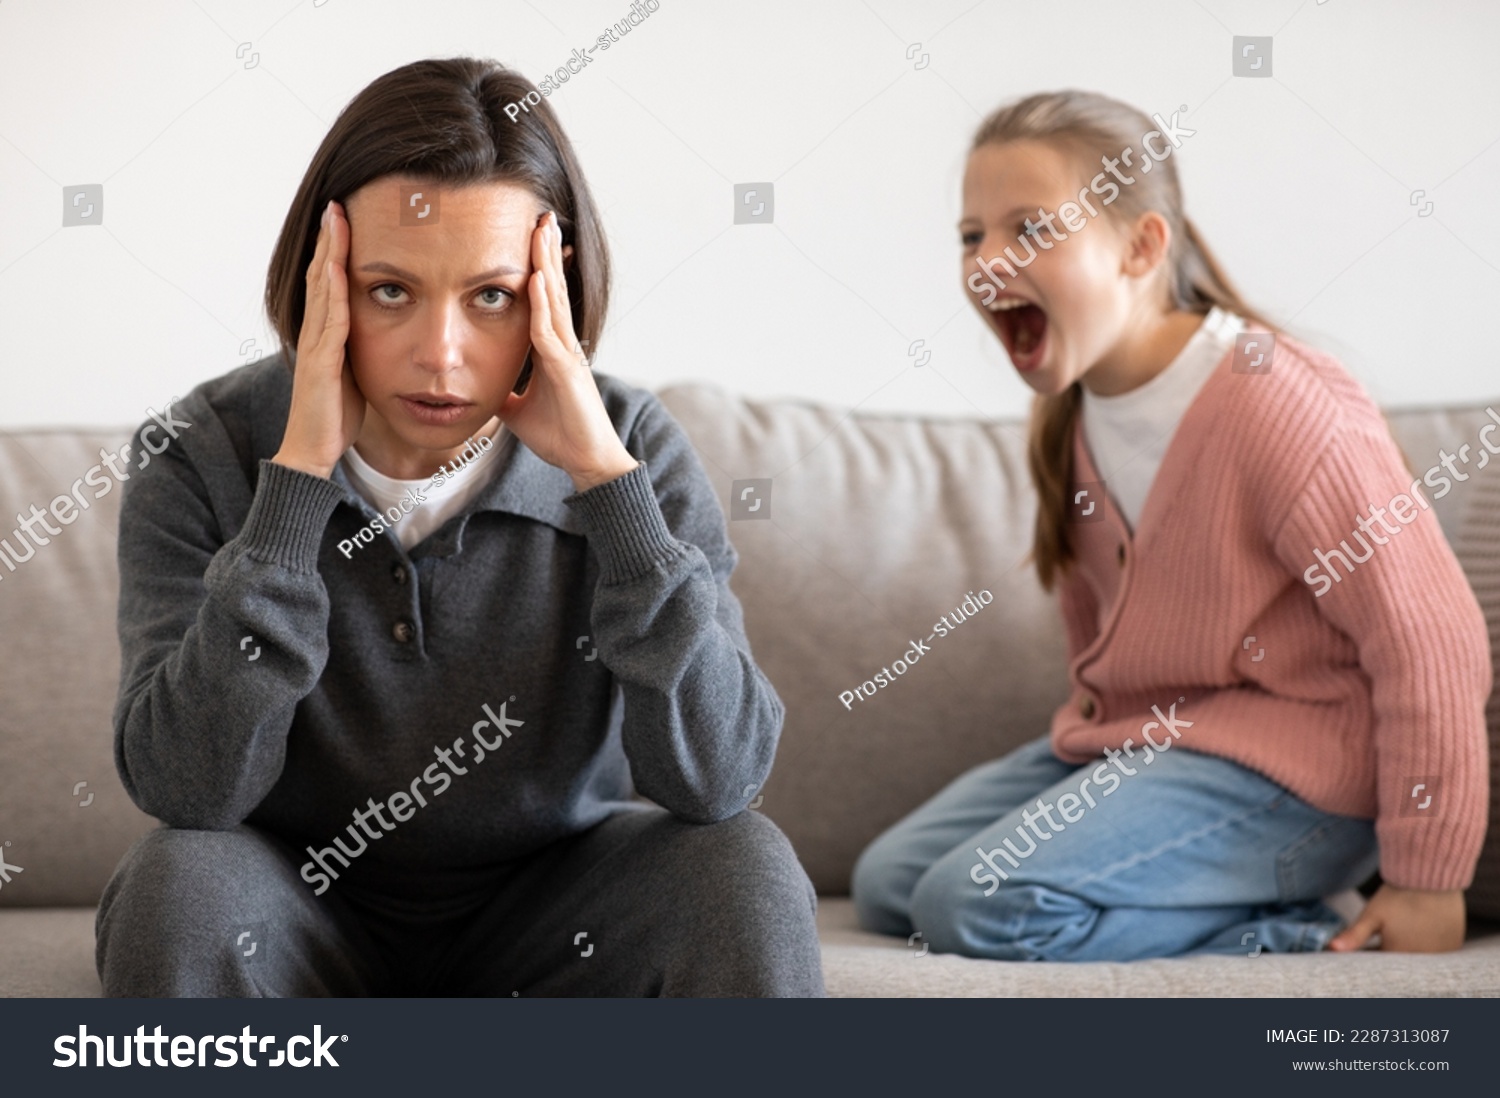 Angry excited aggressive teenager european girl yelling at sad tired millennial woman in living room interior. Relationship problems between mother and daughter, quarrel, hysteria #2287313087